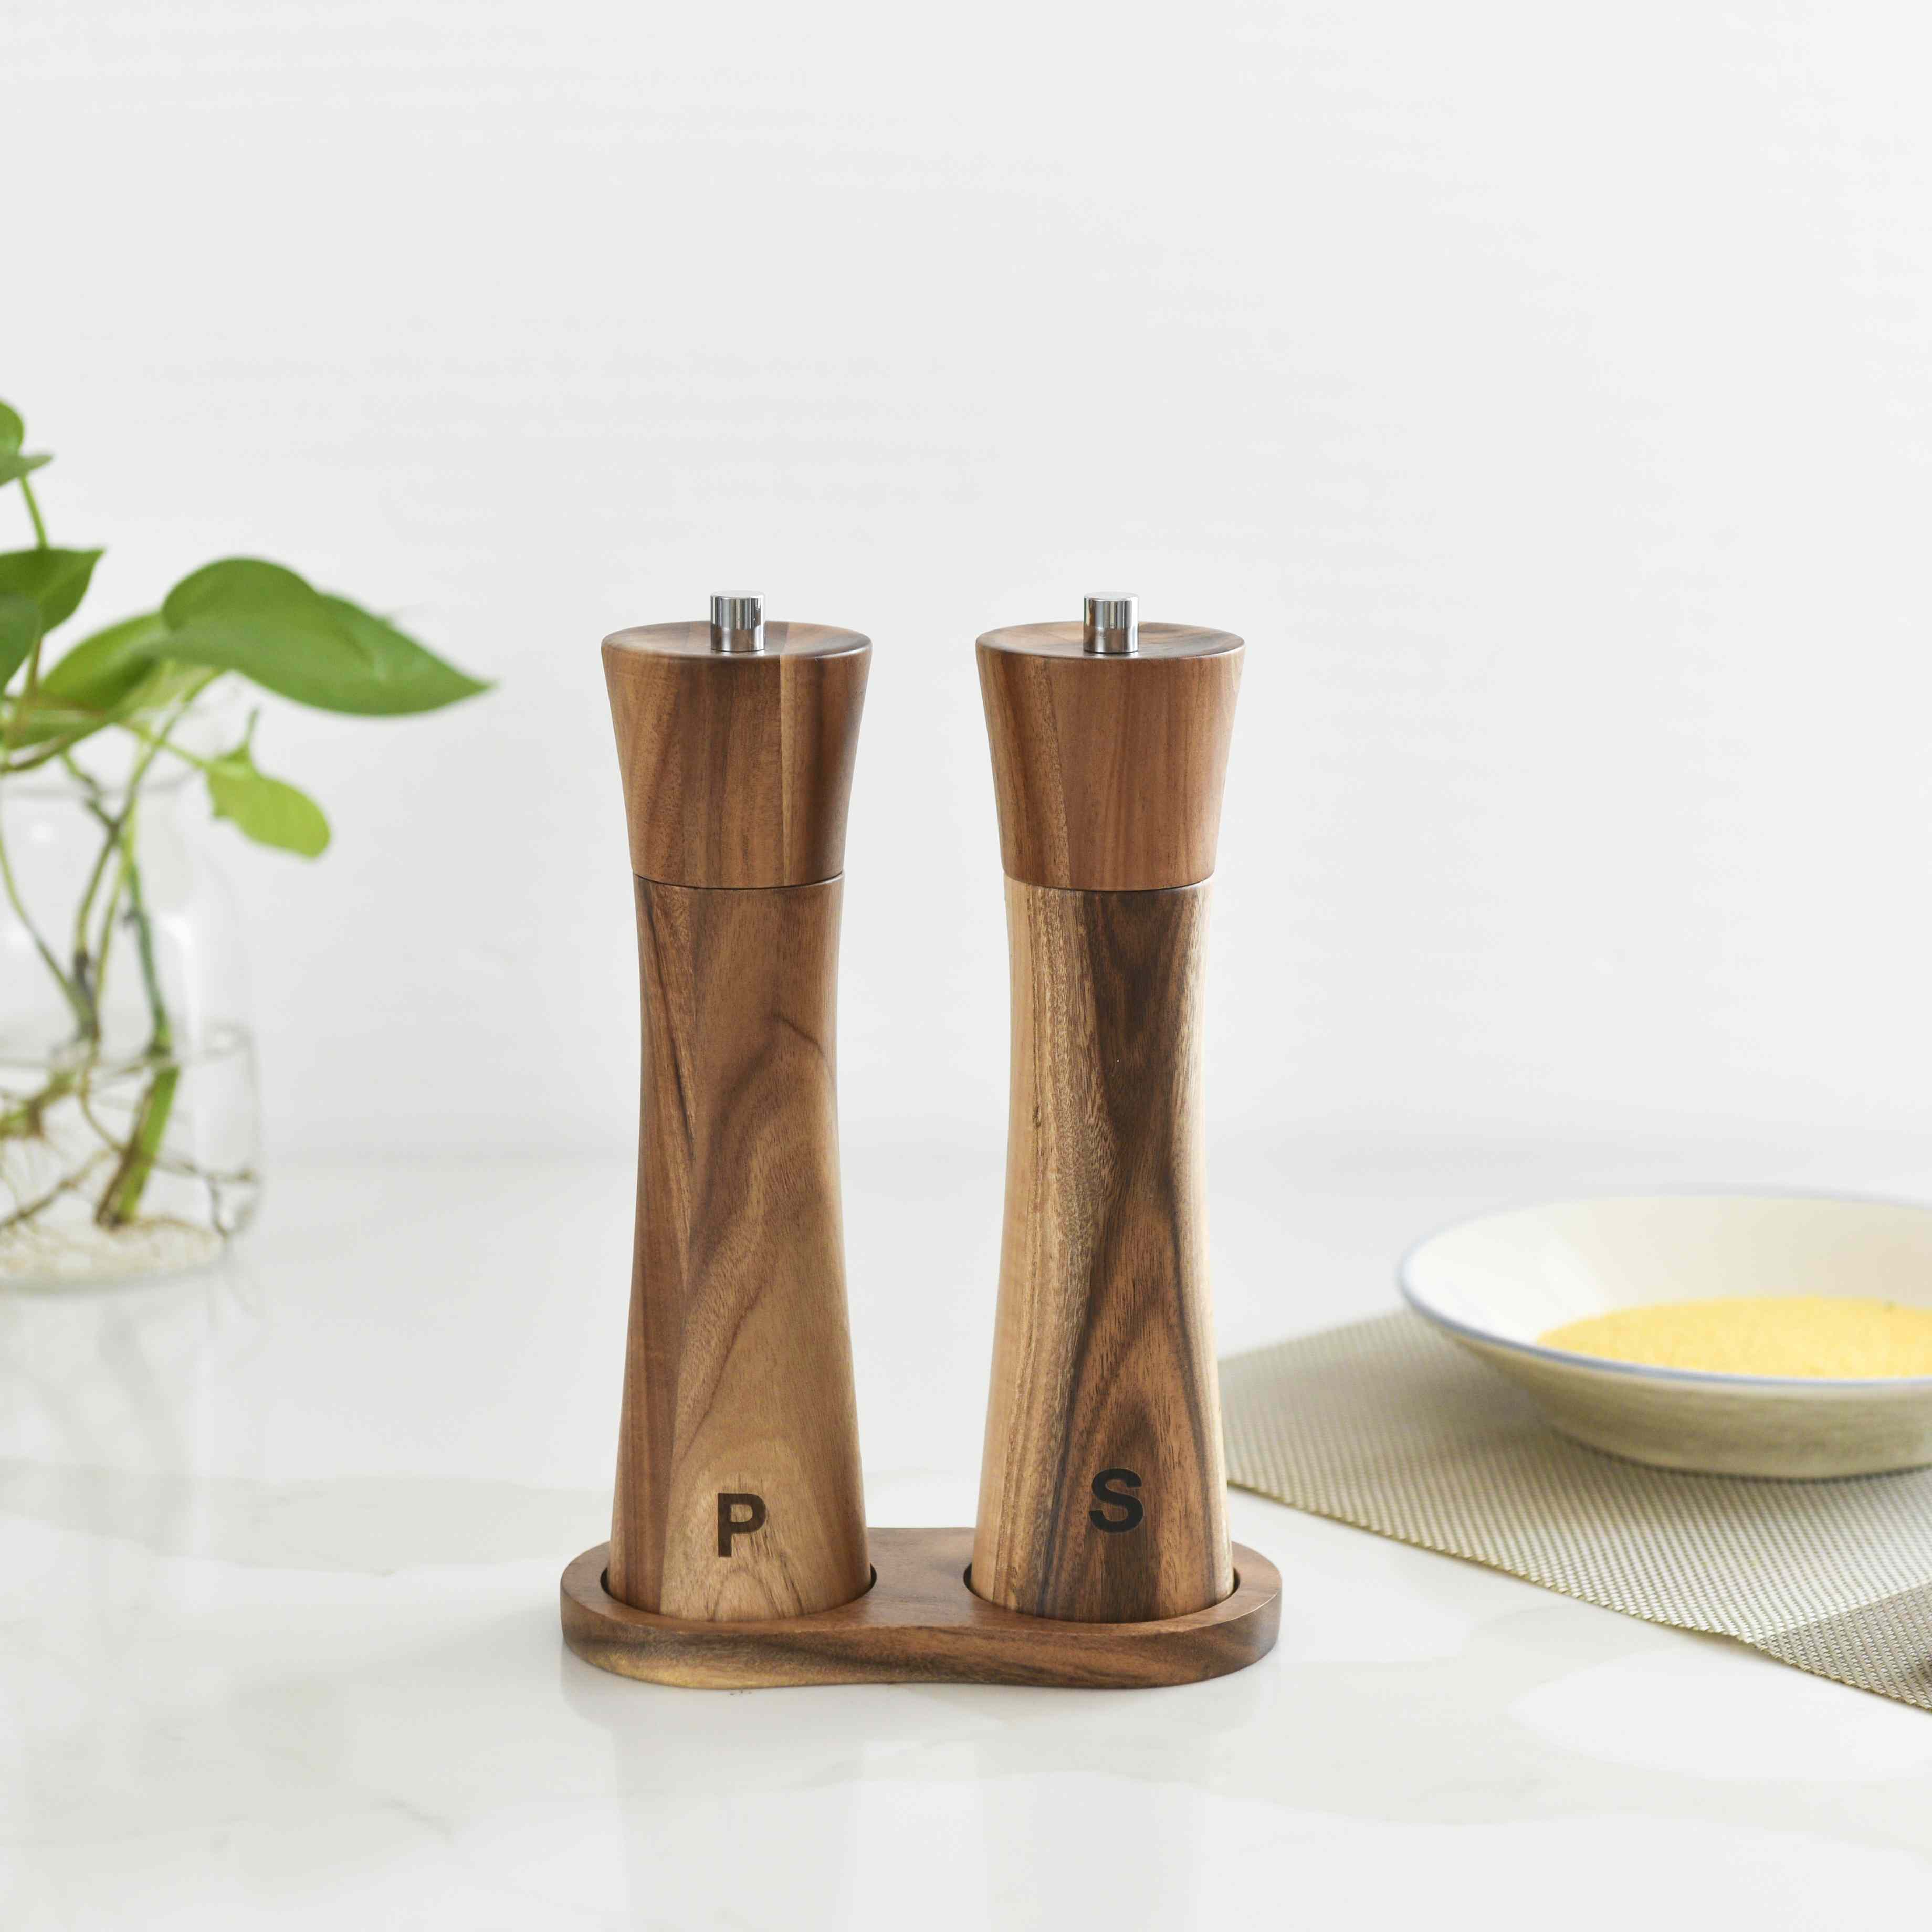 Wood Pepper and Salt Grinder with Wooden Tray Info